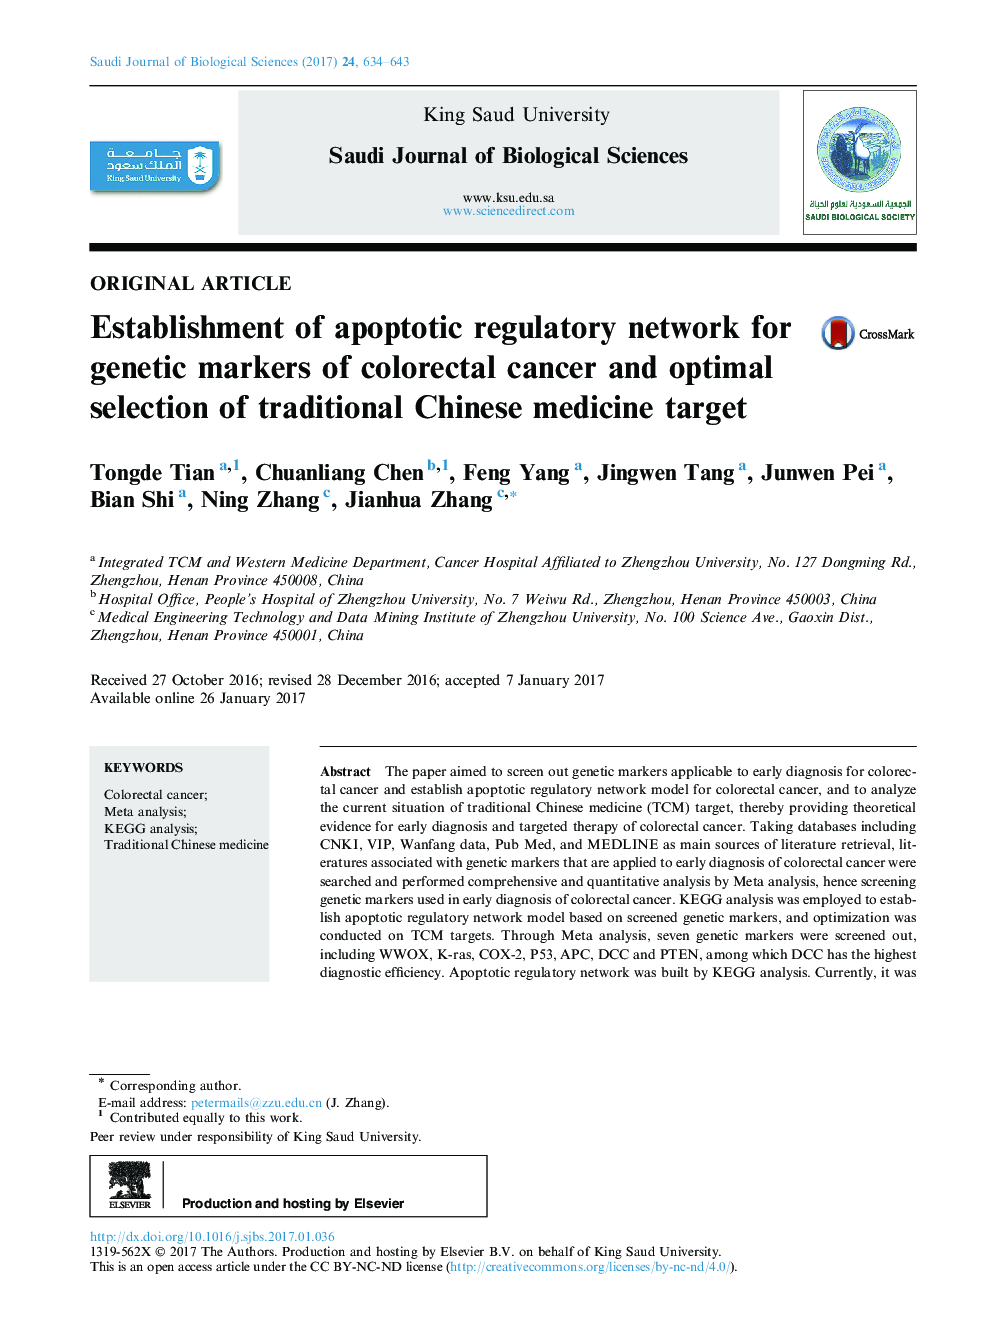 Original articleEstablishment of apoptotic regulatory network for genetic markers of colorectal cancer and optimal selection of traditional Chinese medicine target